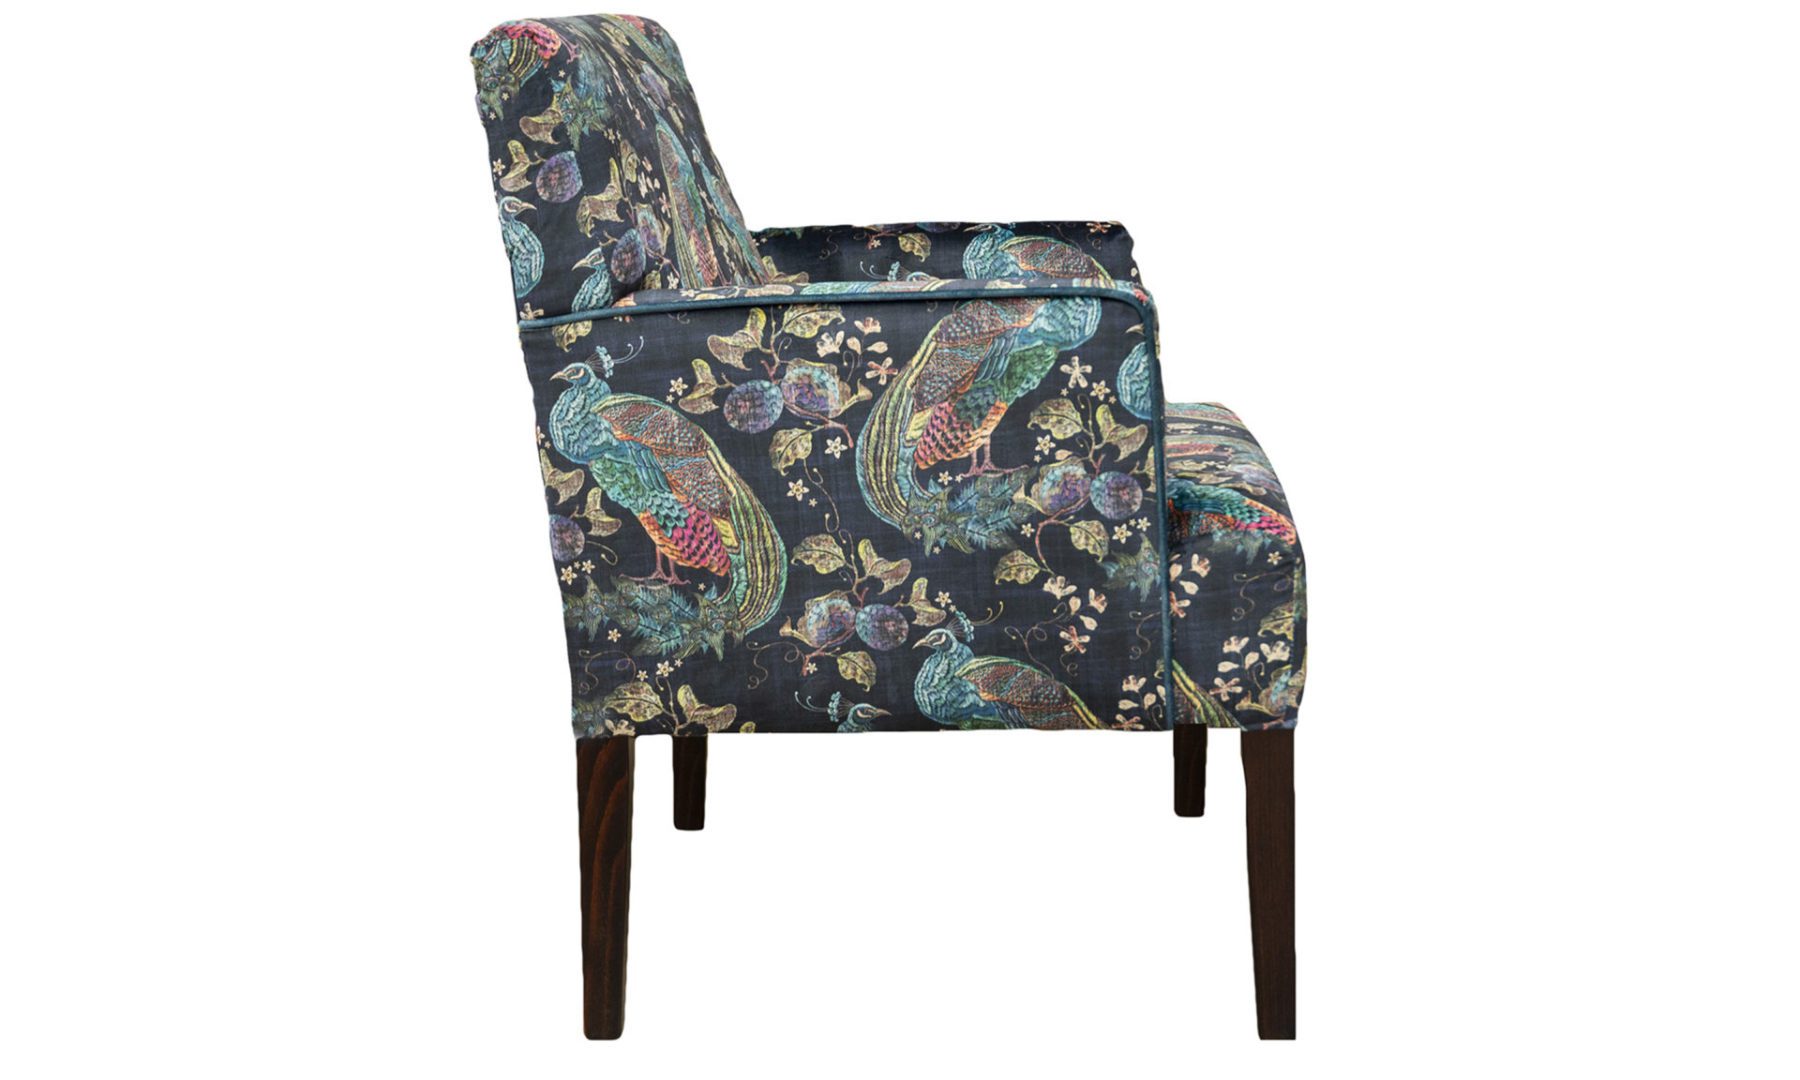 Lisa Chair in Peacock Navy, Platinum Collection Fabric - 405860